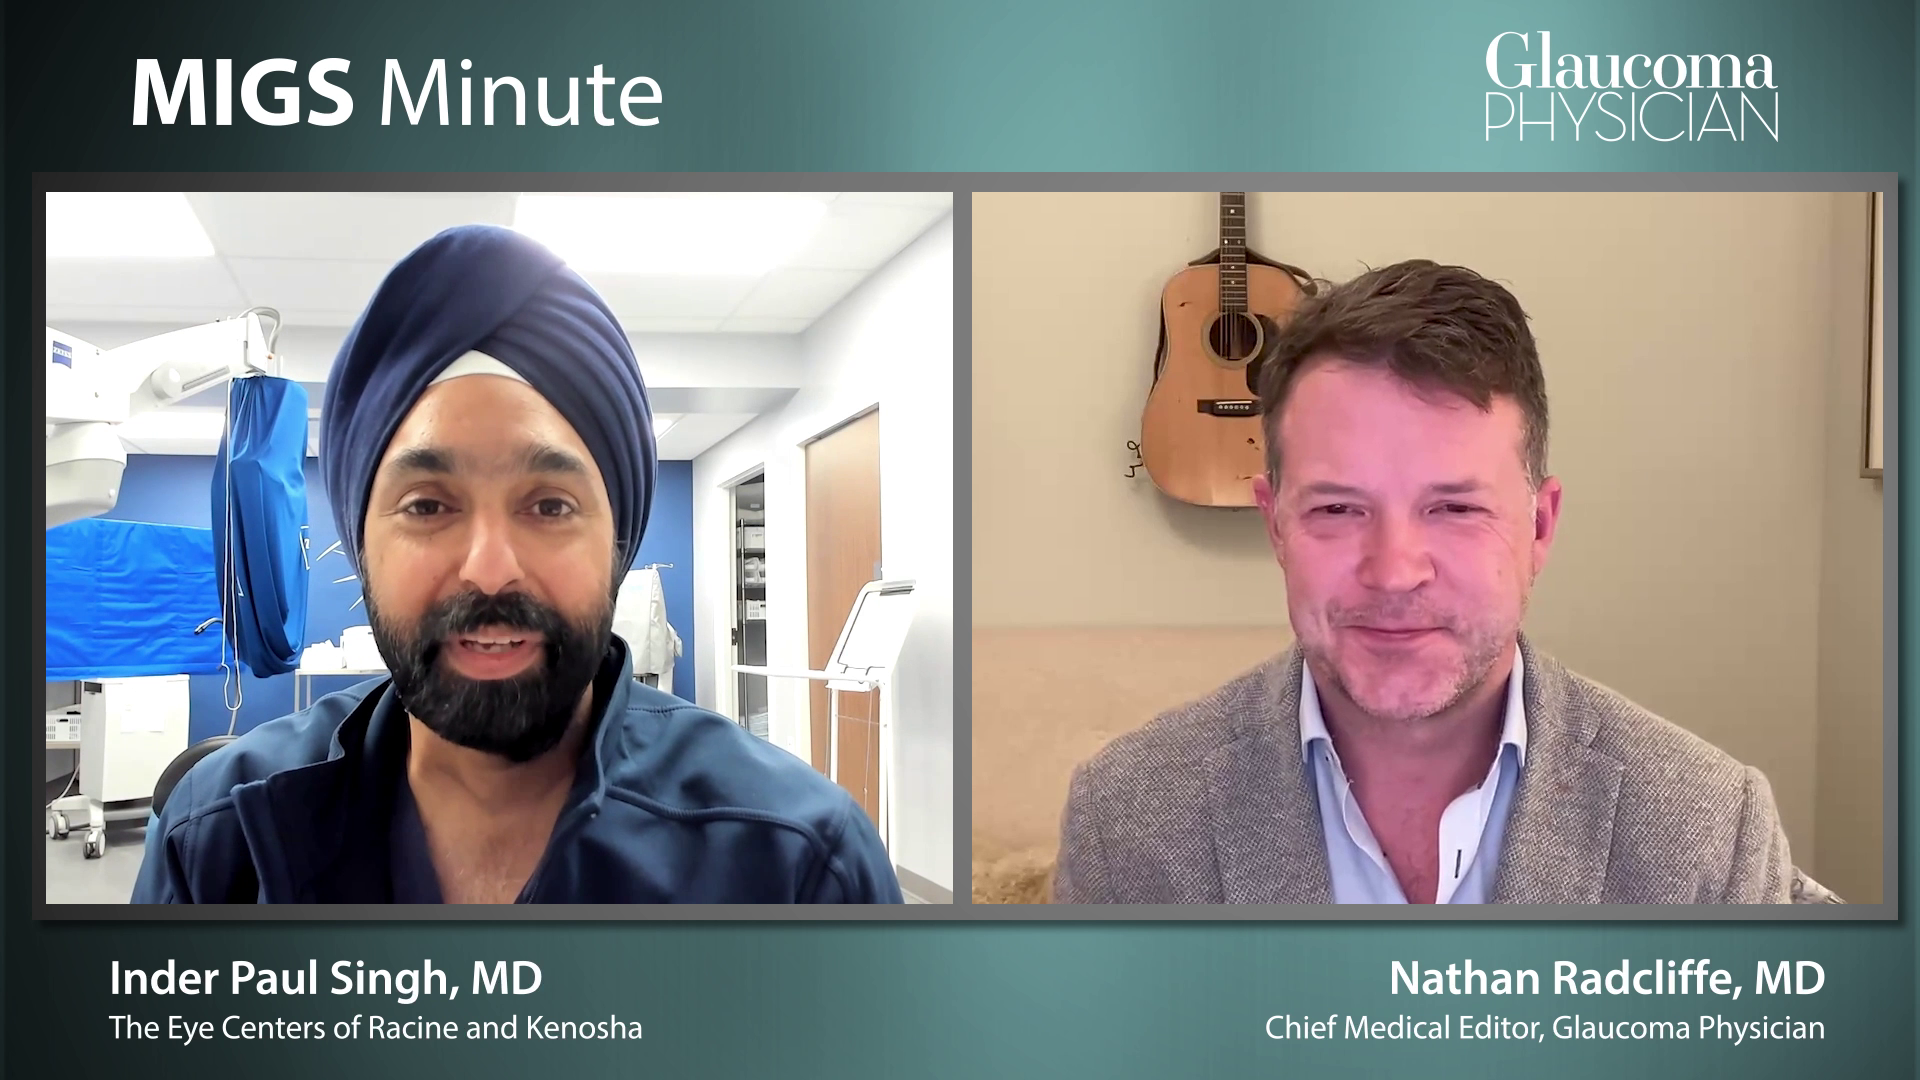 Episode 17: Inder Paul Singh, MD, and Nathan Radcliffe, MD, discuss the benefits of early treatment.